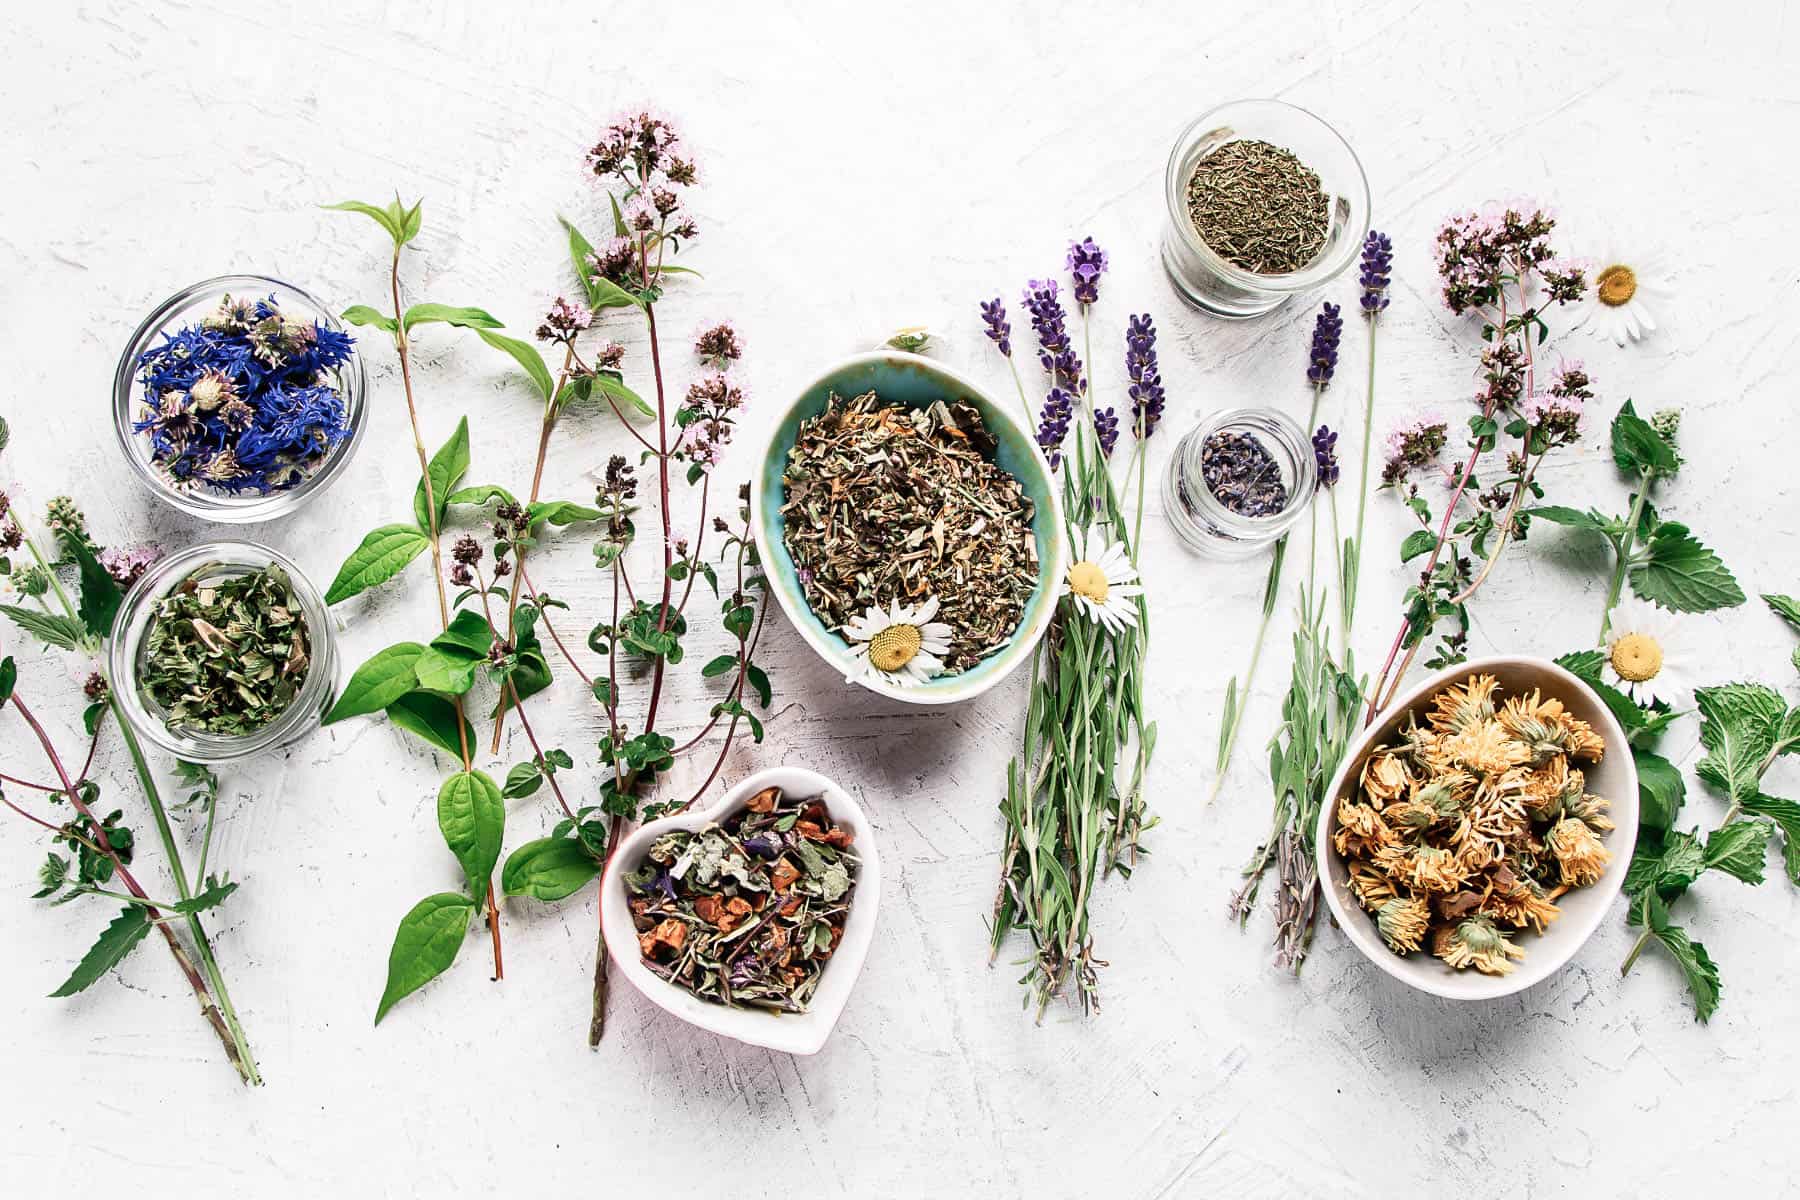 What Herbs Help With Detox